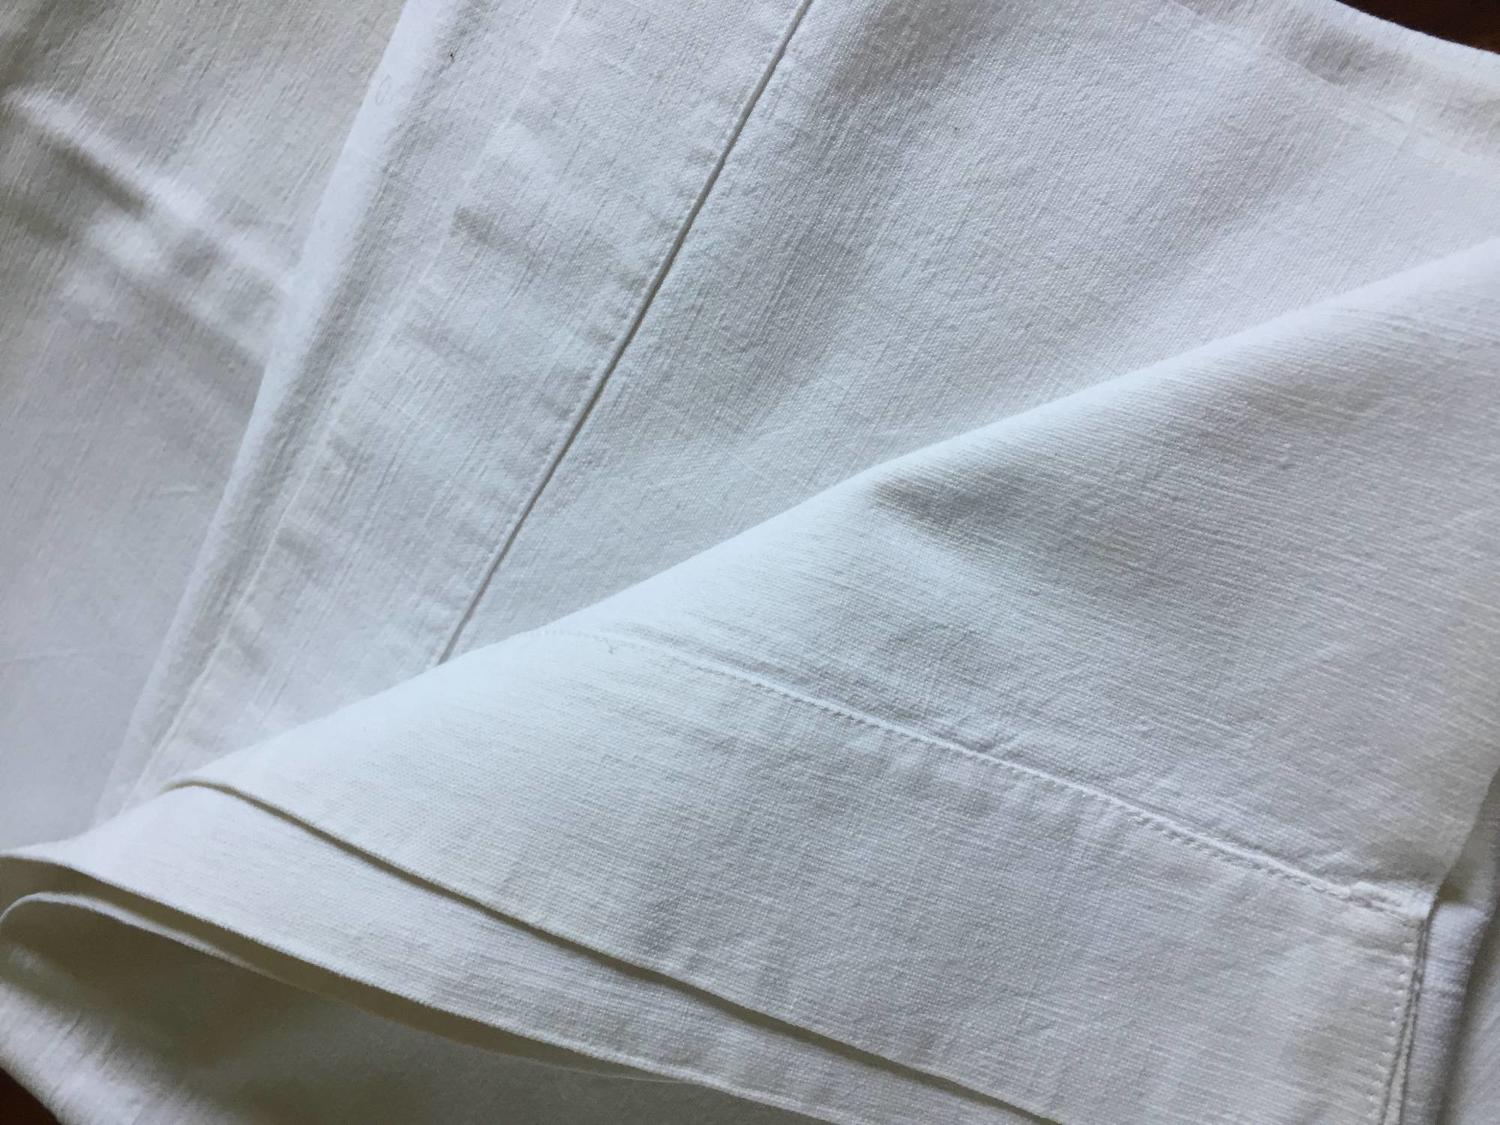 Vintage French Metis Linen Sheet or Tablecloth